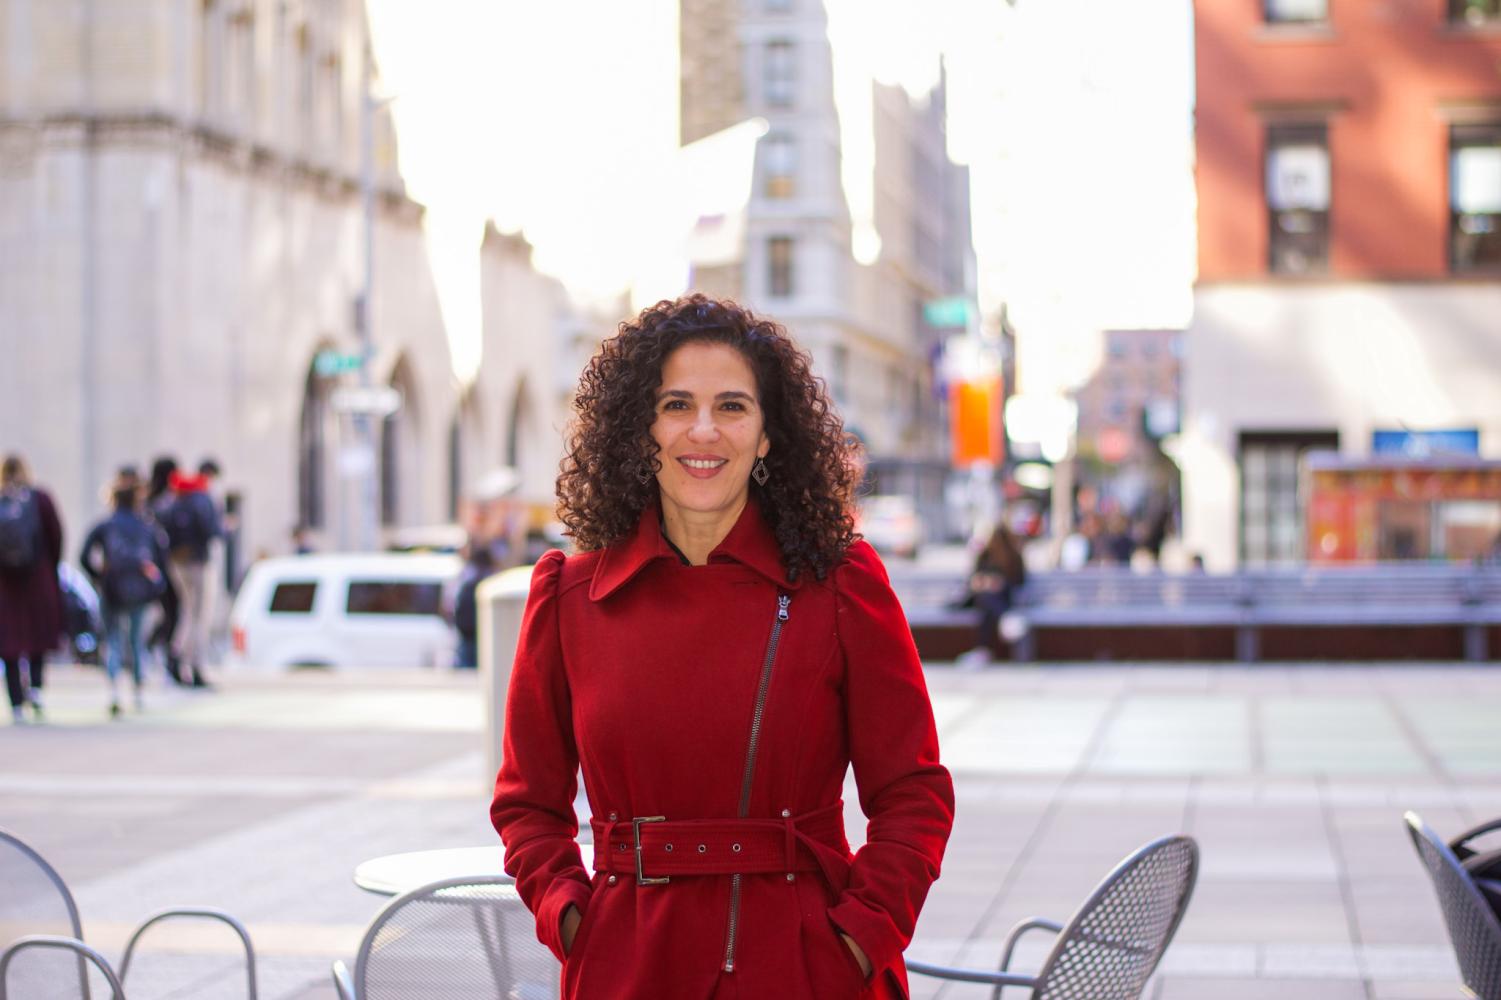 A female with black curly hair wears a long red coat and is smiling and looking toward the camera.